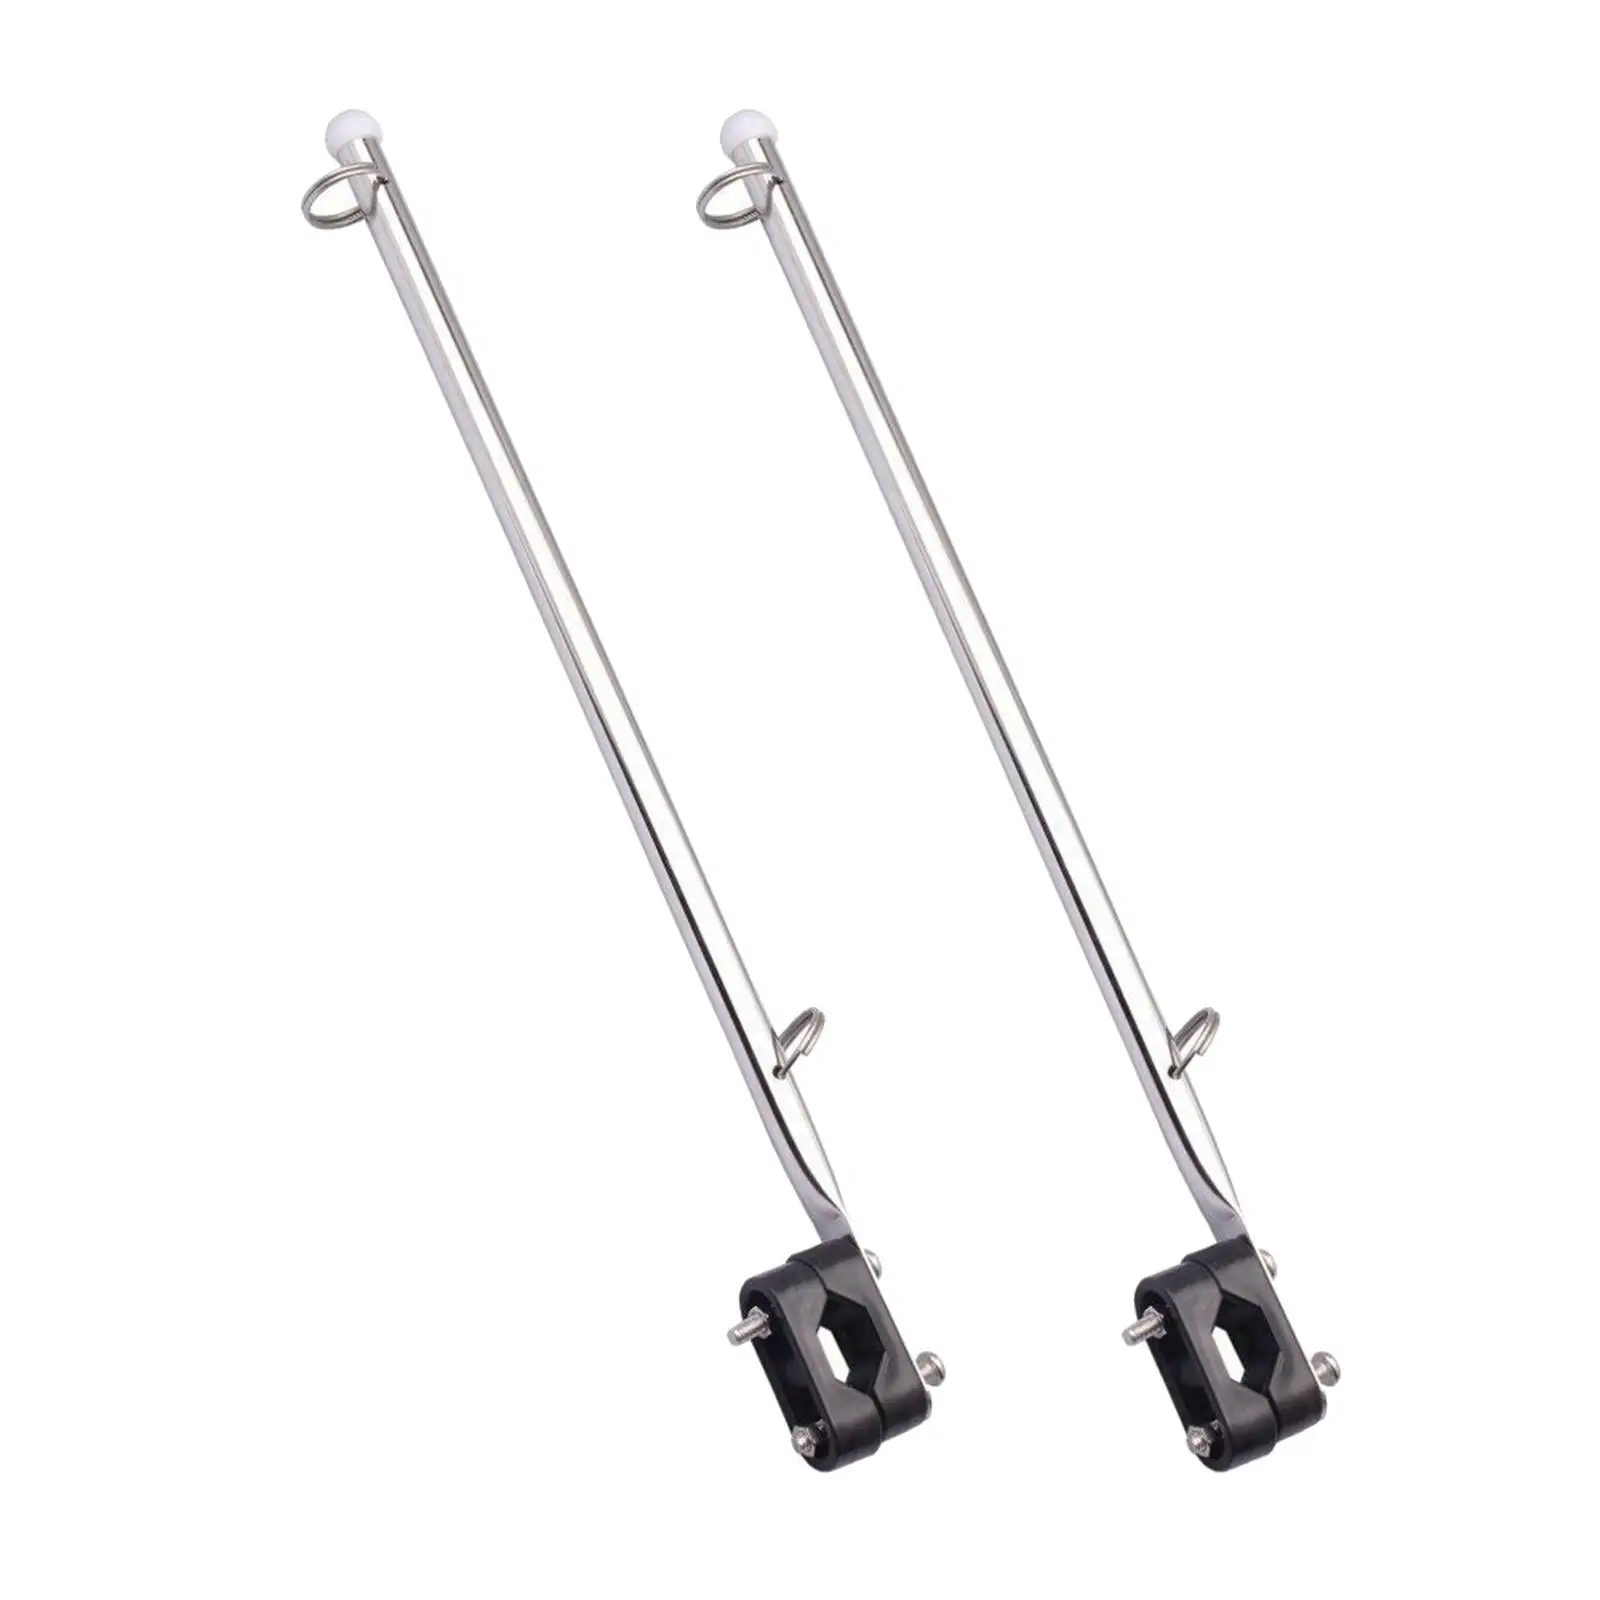 

2 Pieces Flag Pole Stainless Steel Rail Mount Flag Staff Marine Holder Adjustable Durable Yacht with Base Flagpole for Yacht